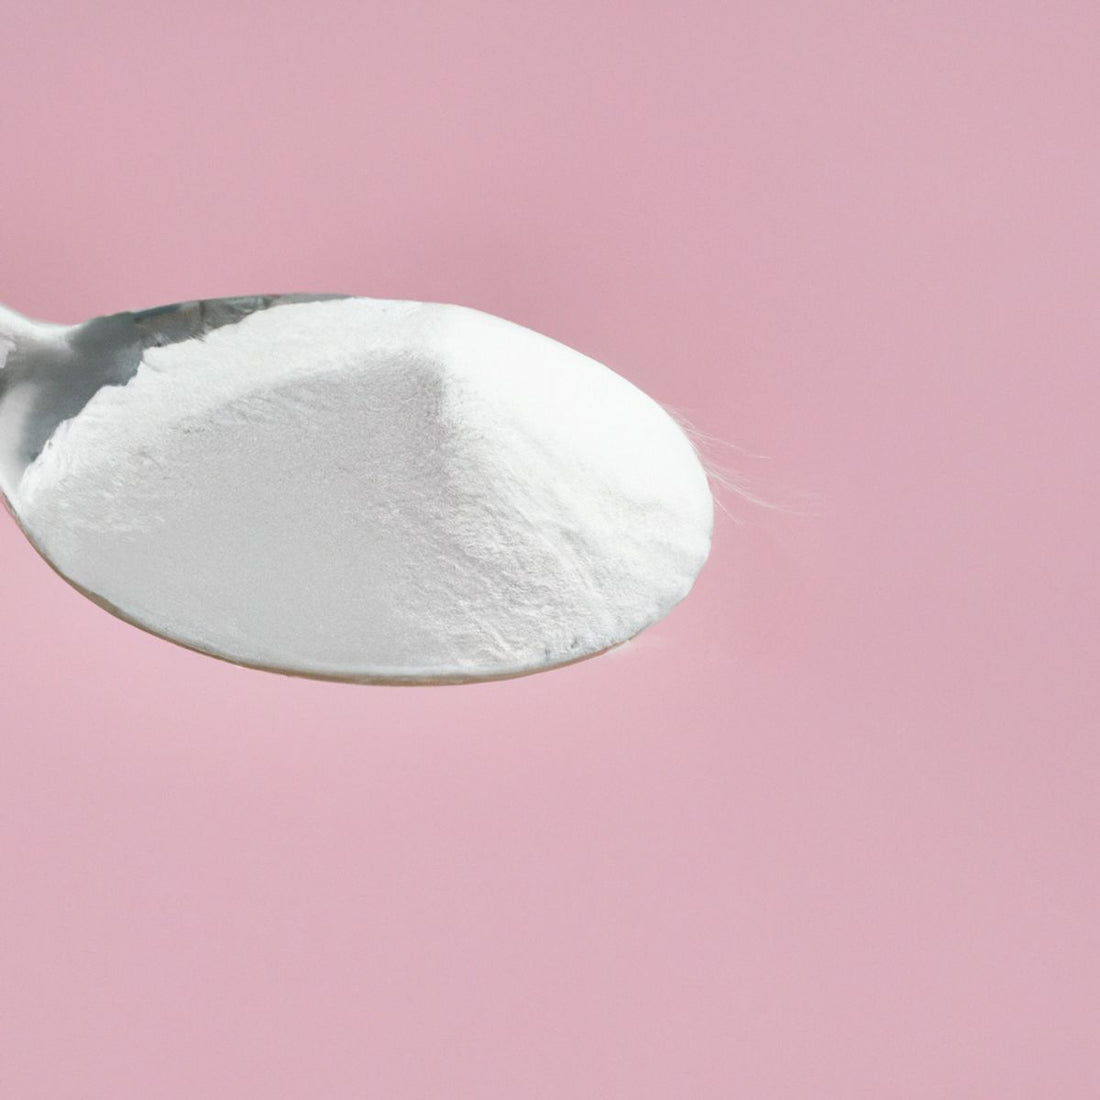 Busting the Myths: The Genuine Scoop on Collagen Powder